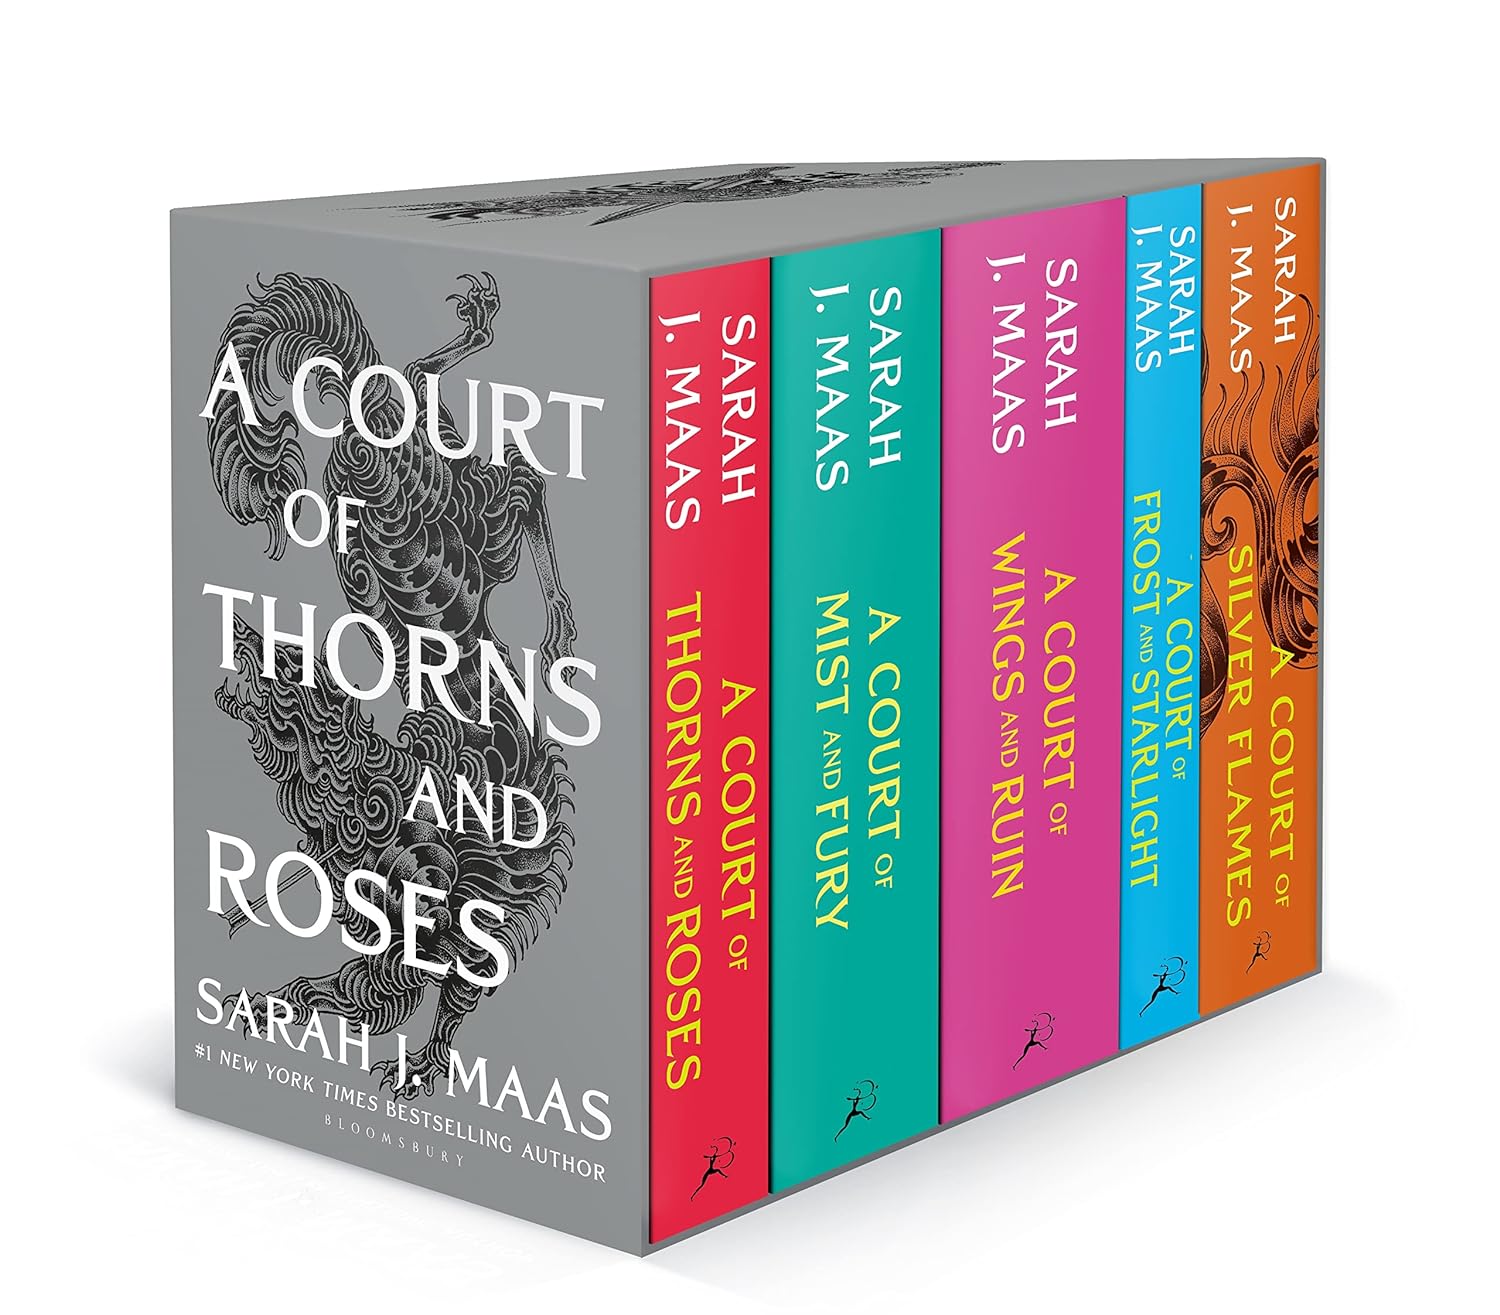 A Court of Thorns and Roses Paperback Box Set (5 books) (A Court of Thorns and Roses, 9) DigitallYourz